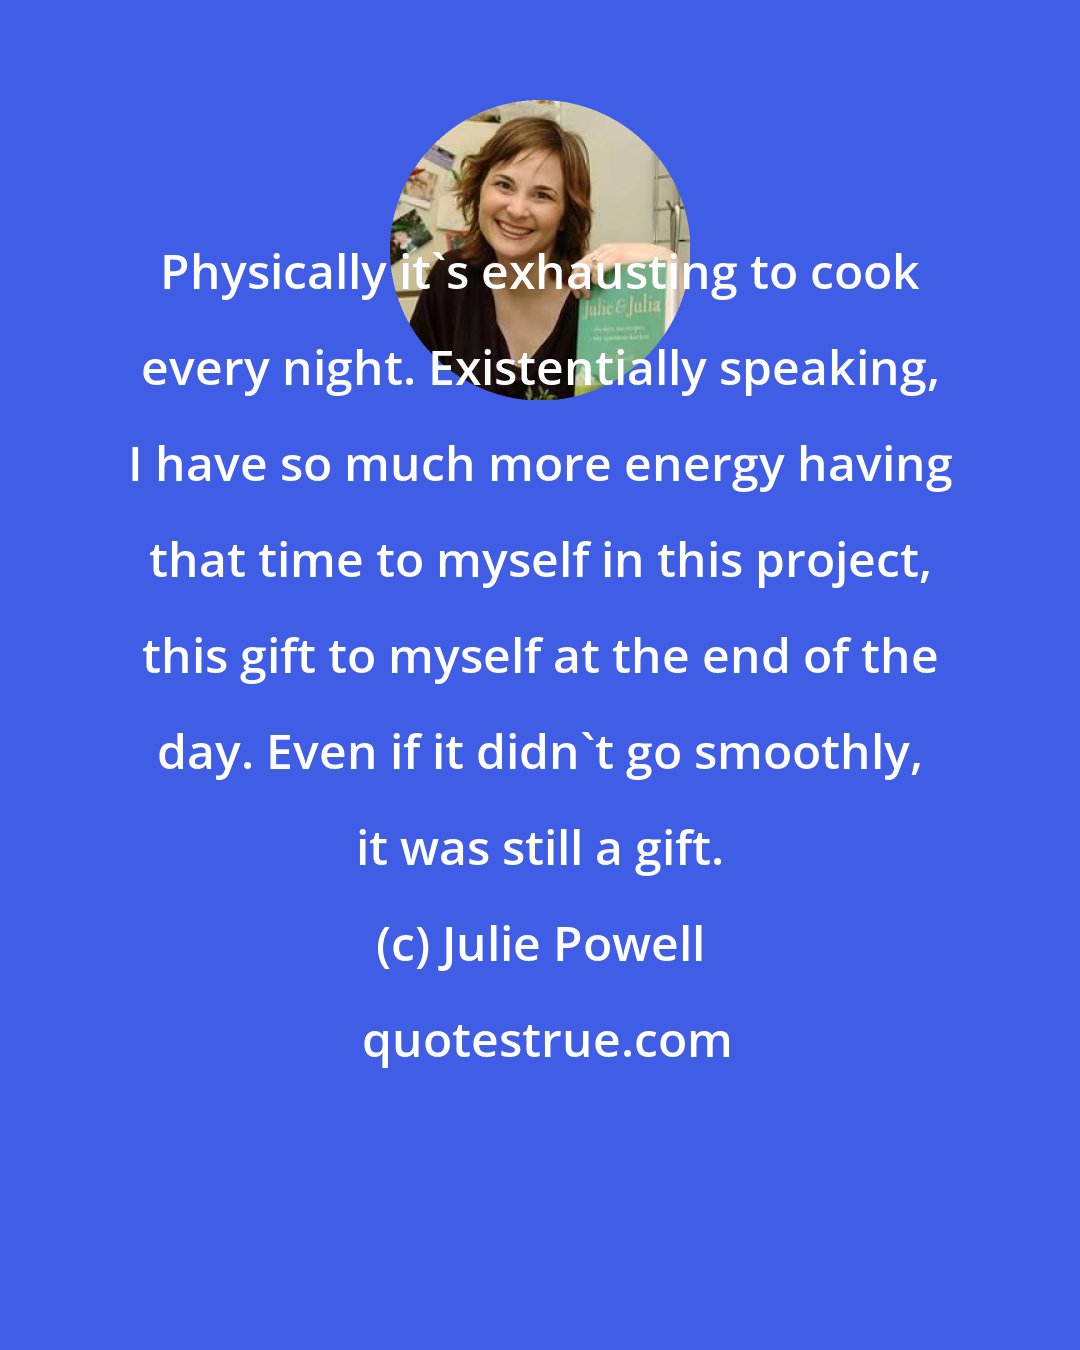 Julie Powell: Physically it's exhausting to cook every night. Existentially speaking, I have so much more energy having that time to myself in this project, this gift to myself at the end of the day. Even if it didn't go smoothly, it was still a gift.